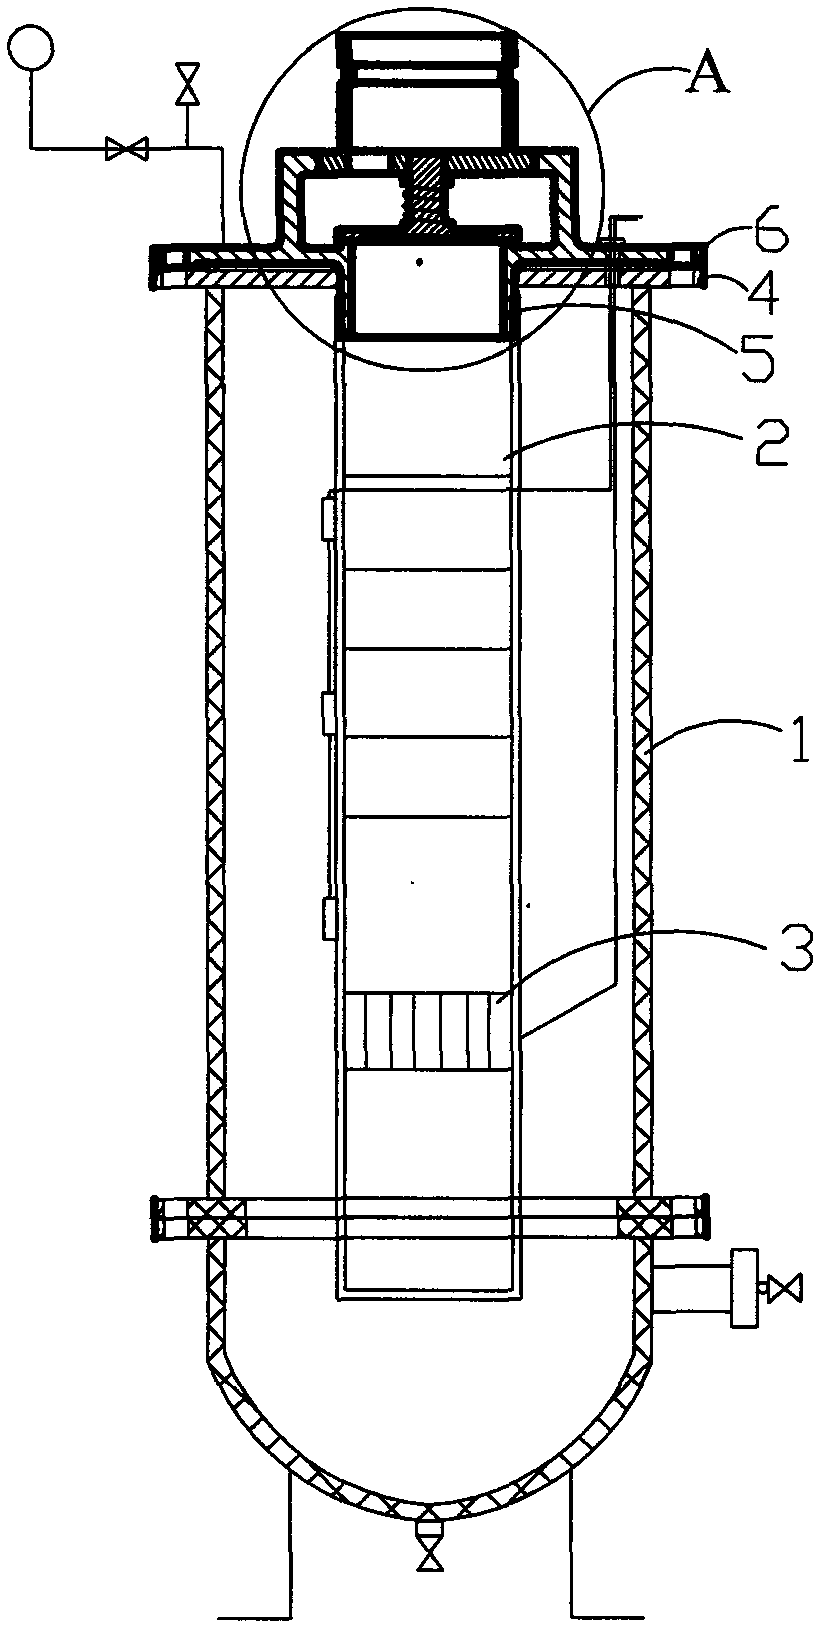 Pressure stabilizing and laminating water supply equipment